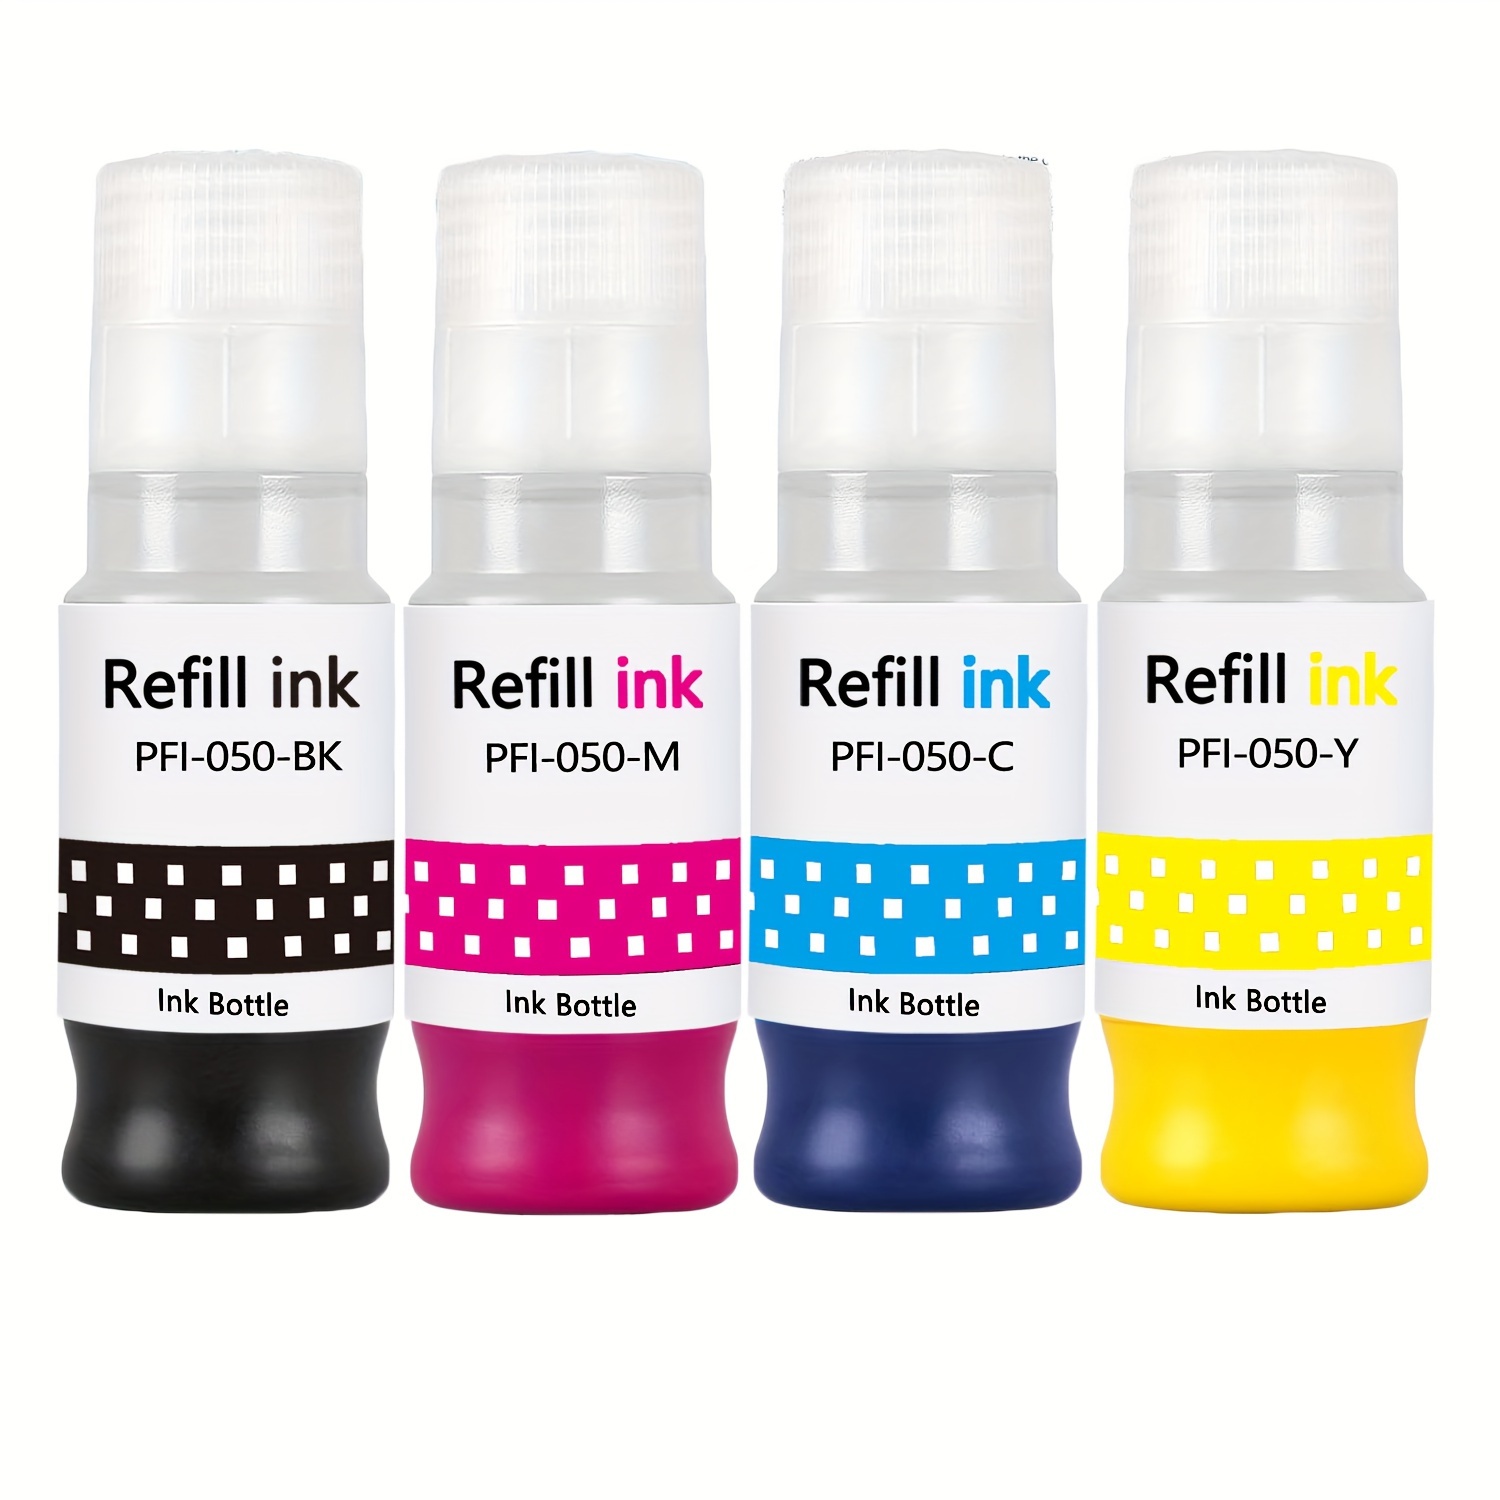 Black Ink Refill Cartridges for Canon IX6820  Texsource — Texsource Screen  Printing Supply